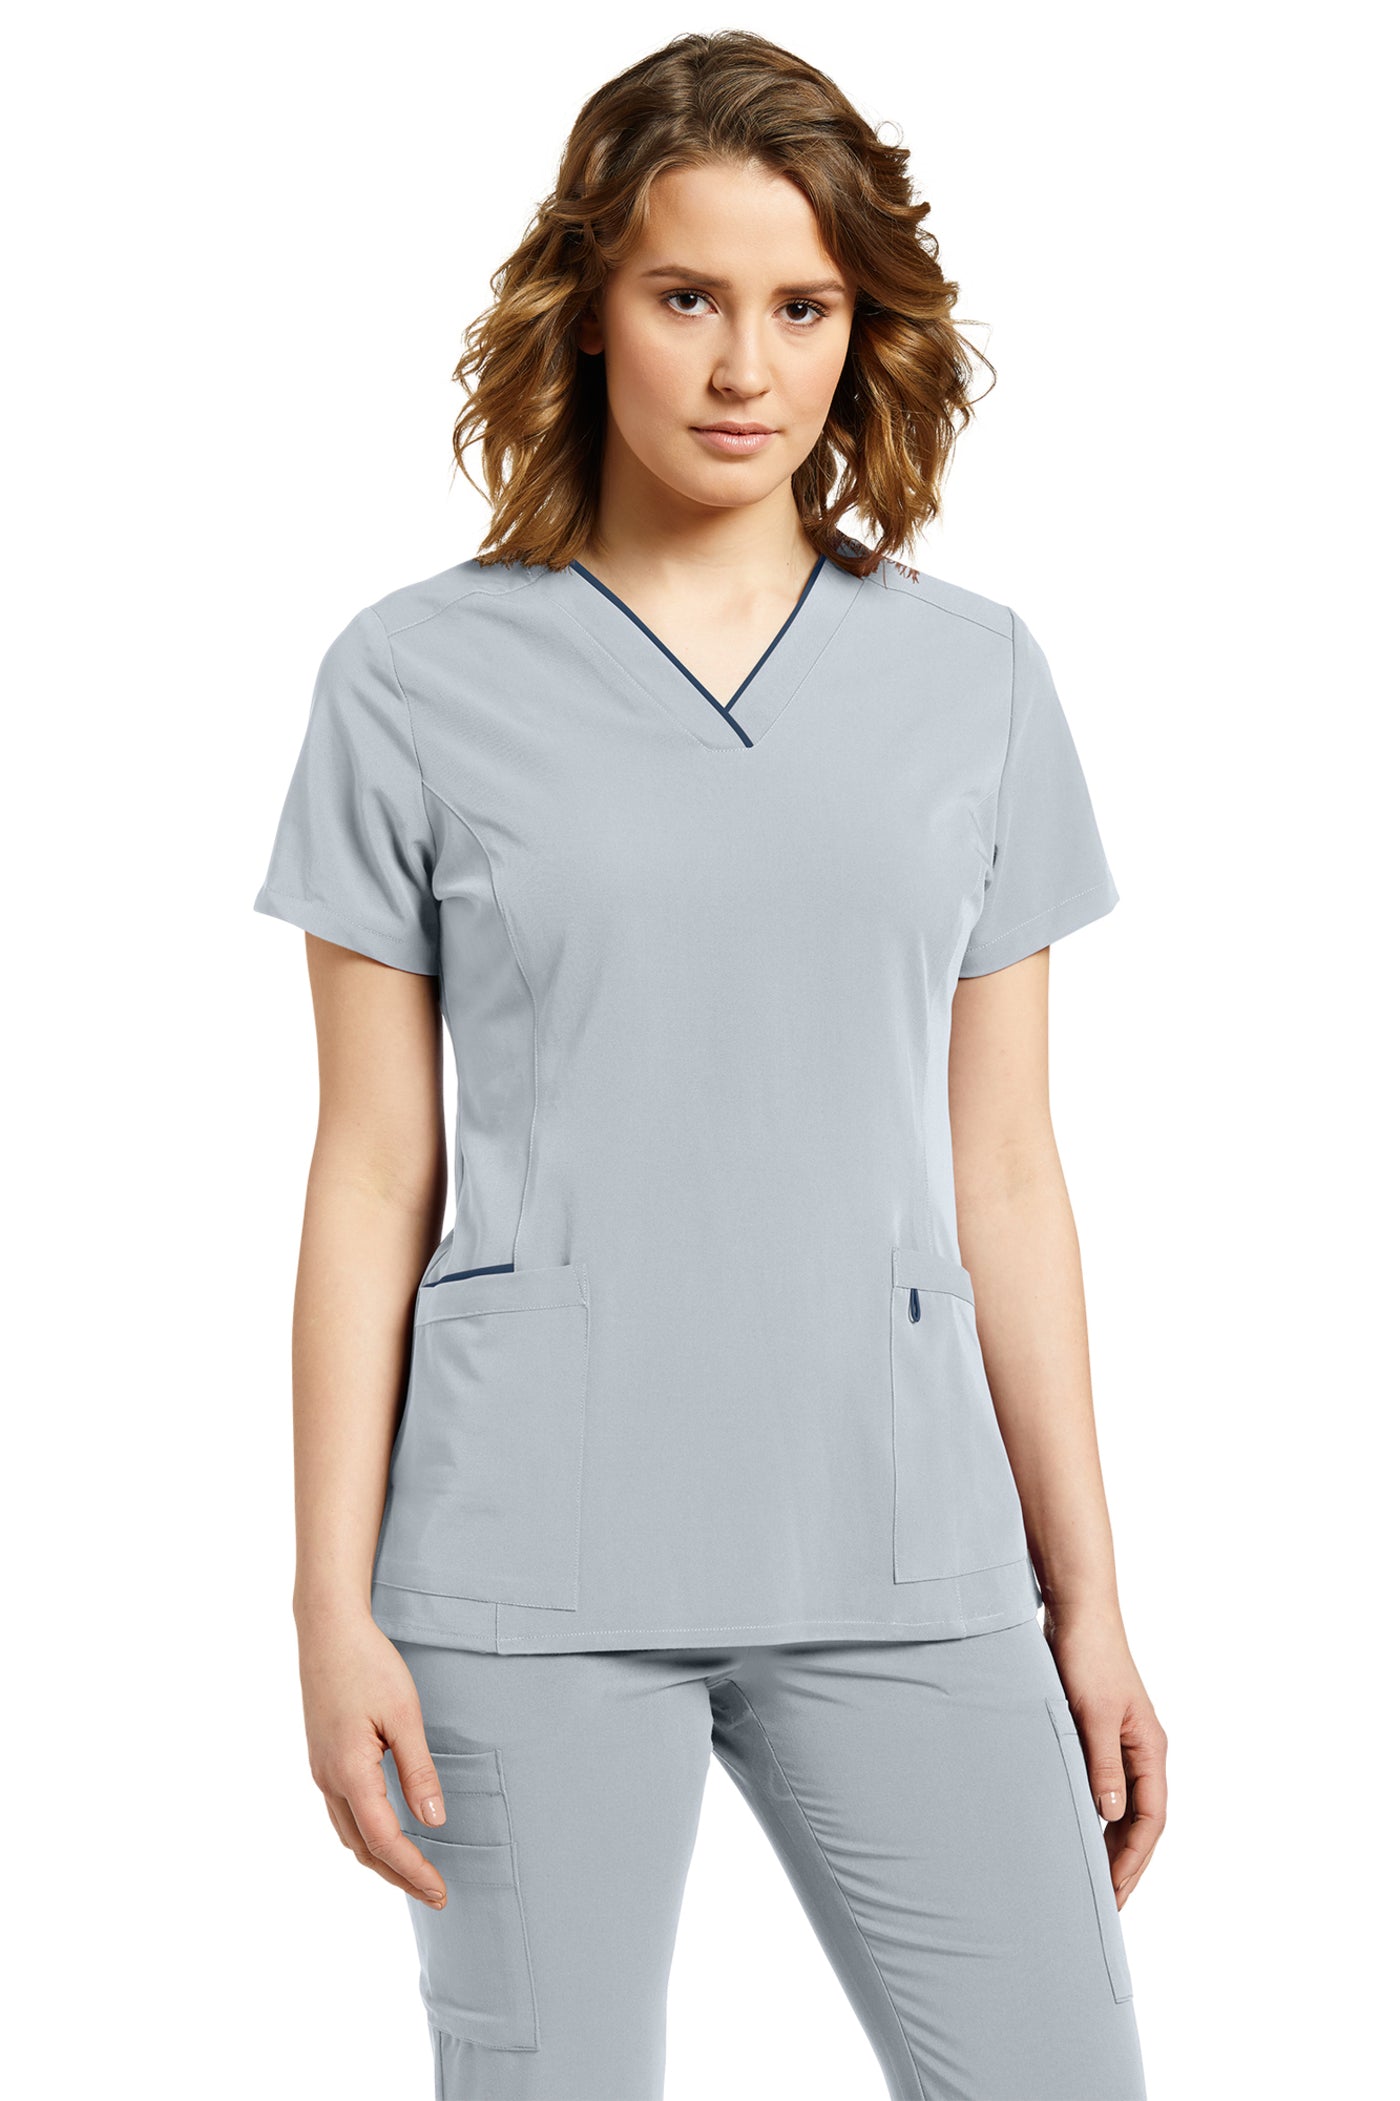 755 Marvella by White Cross Soft Comfortable Scrub Top for Women with Contrast Trim